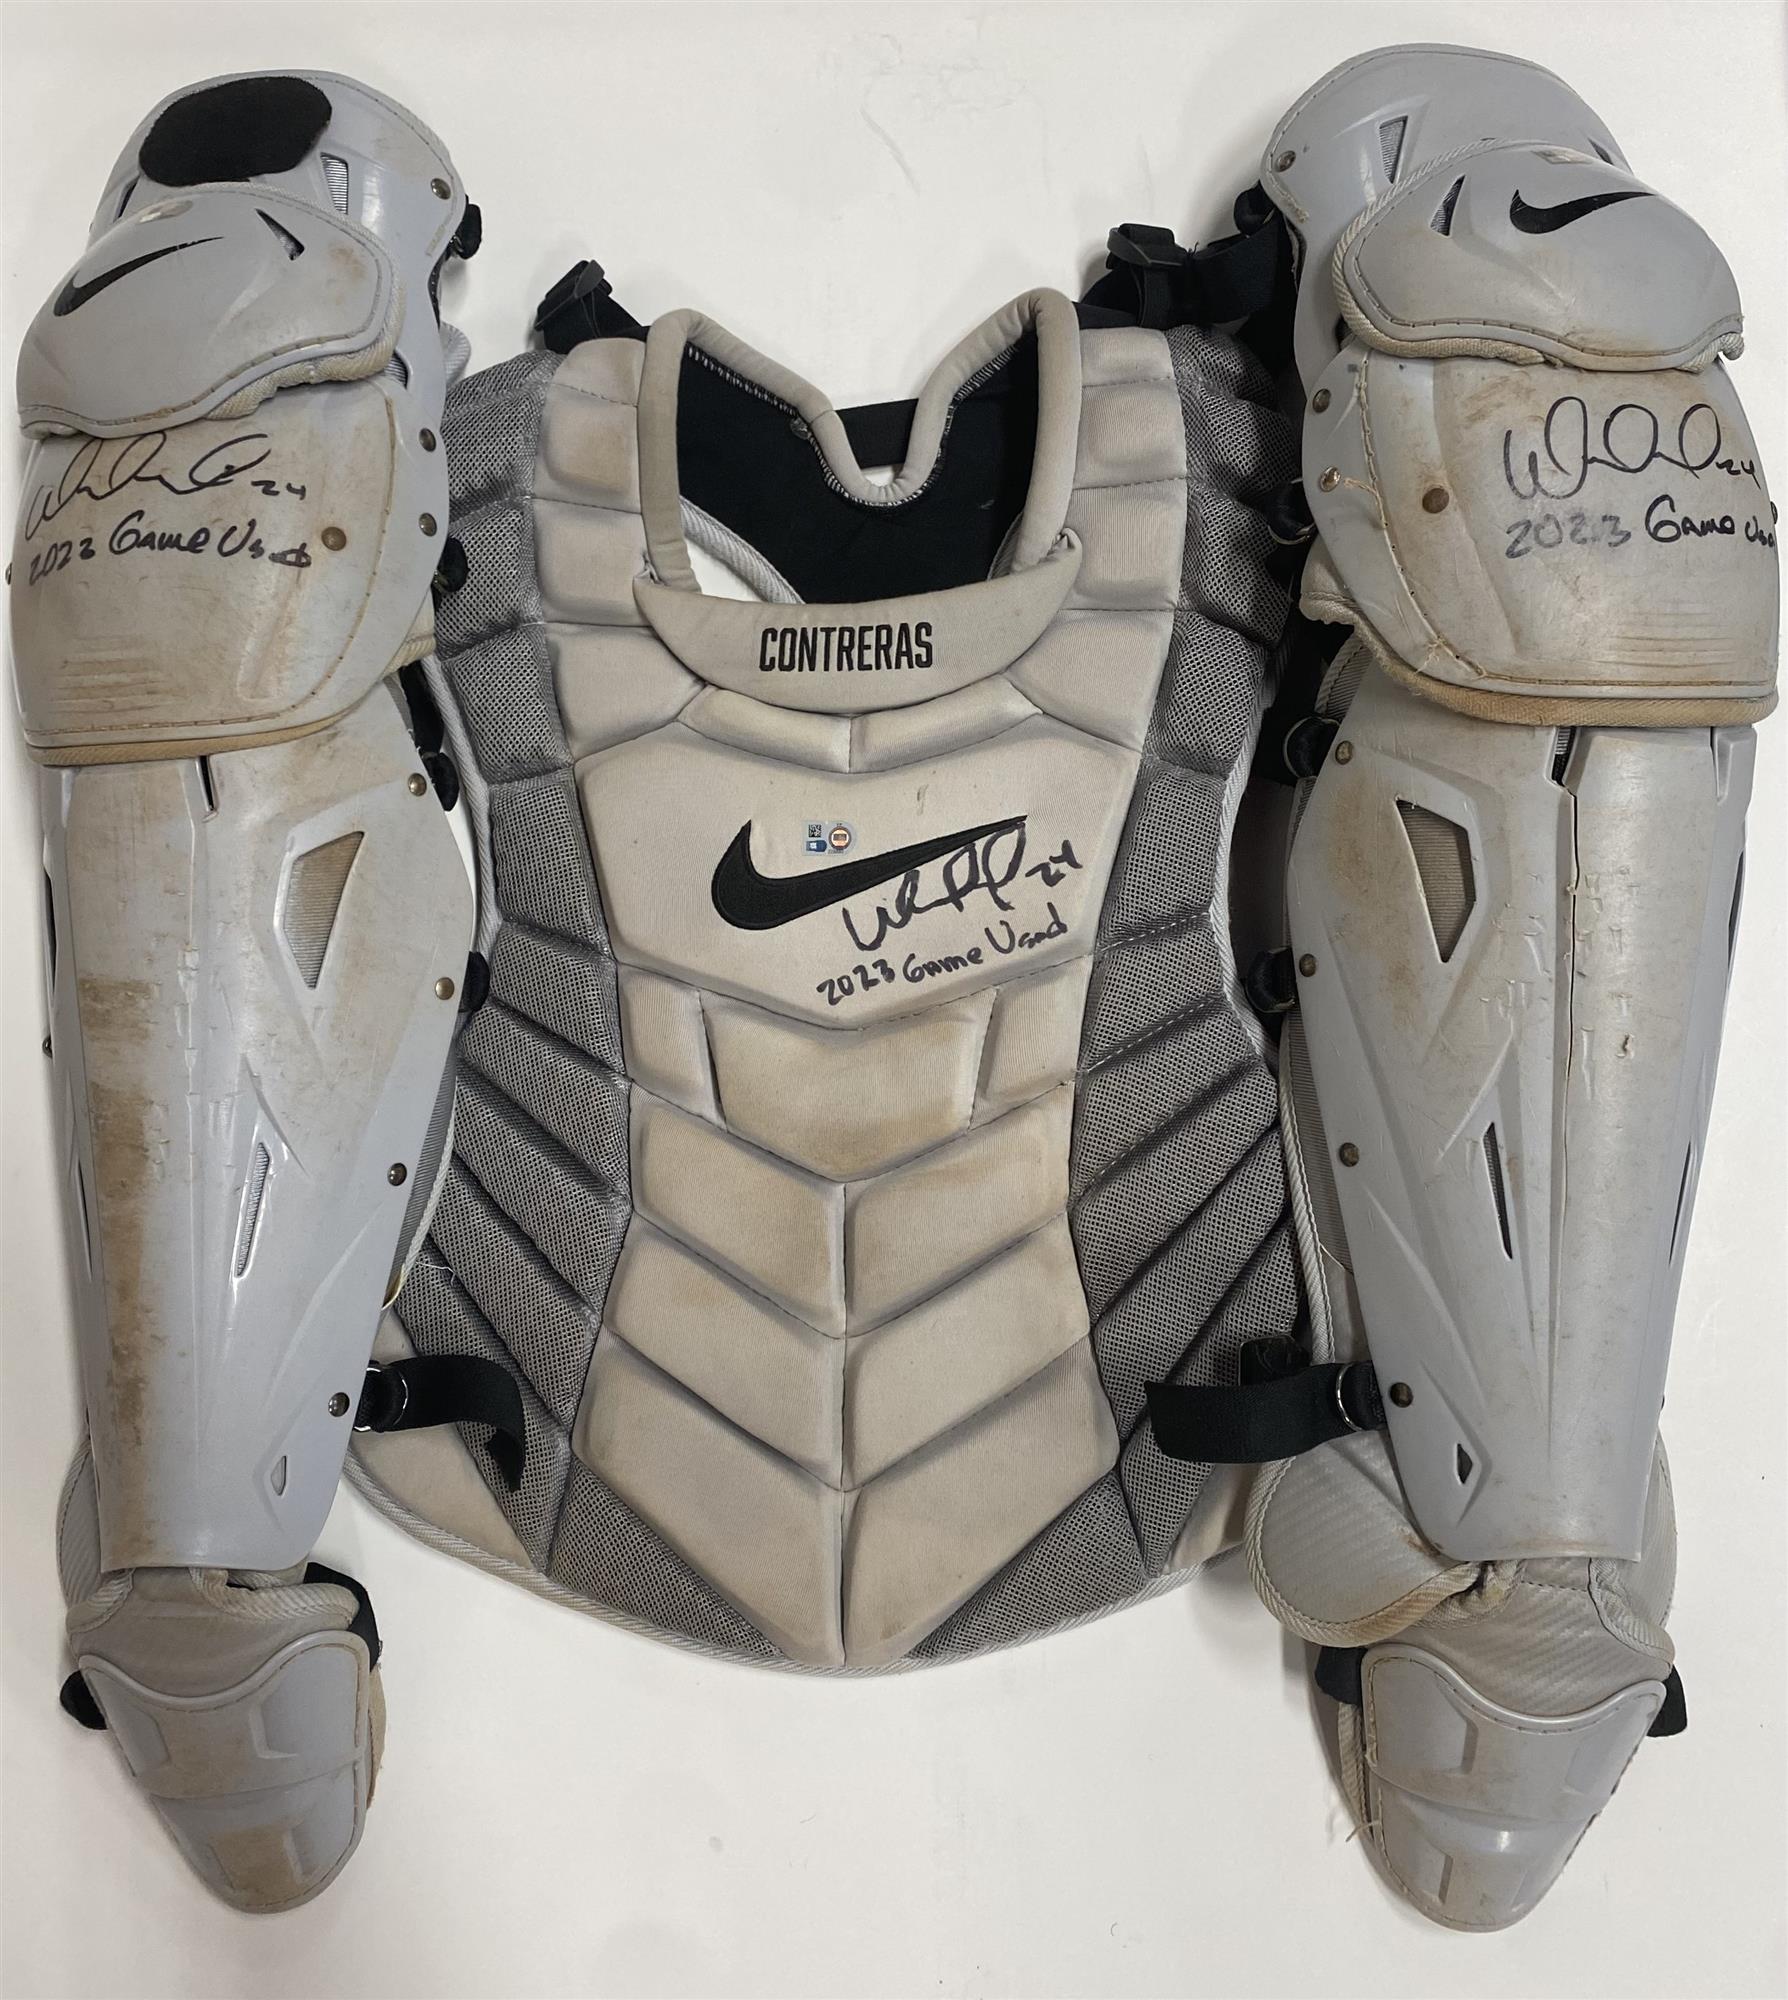 WILLIAM CONTRERAS SIGNED BREWERS 2023 GAME USED CATCHERS GEAR #3 - JSA